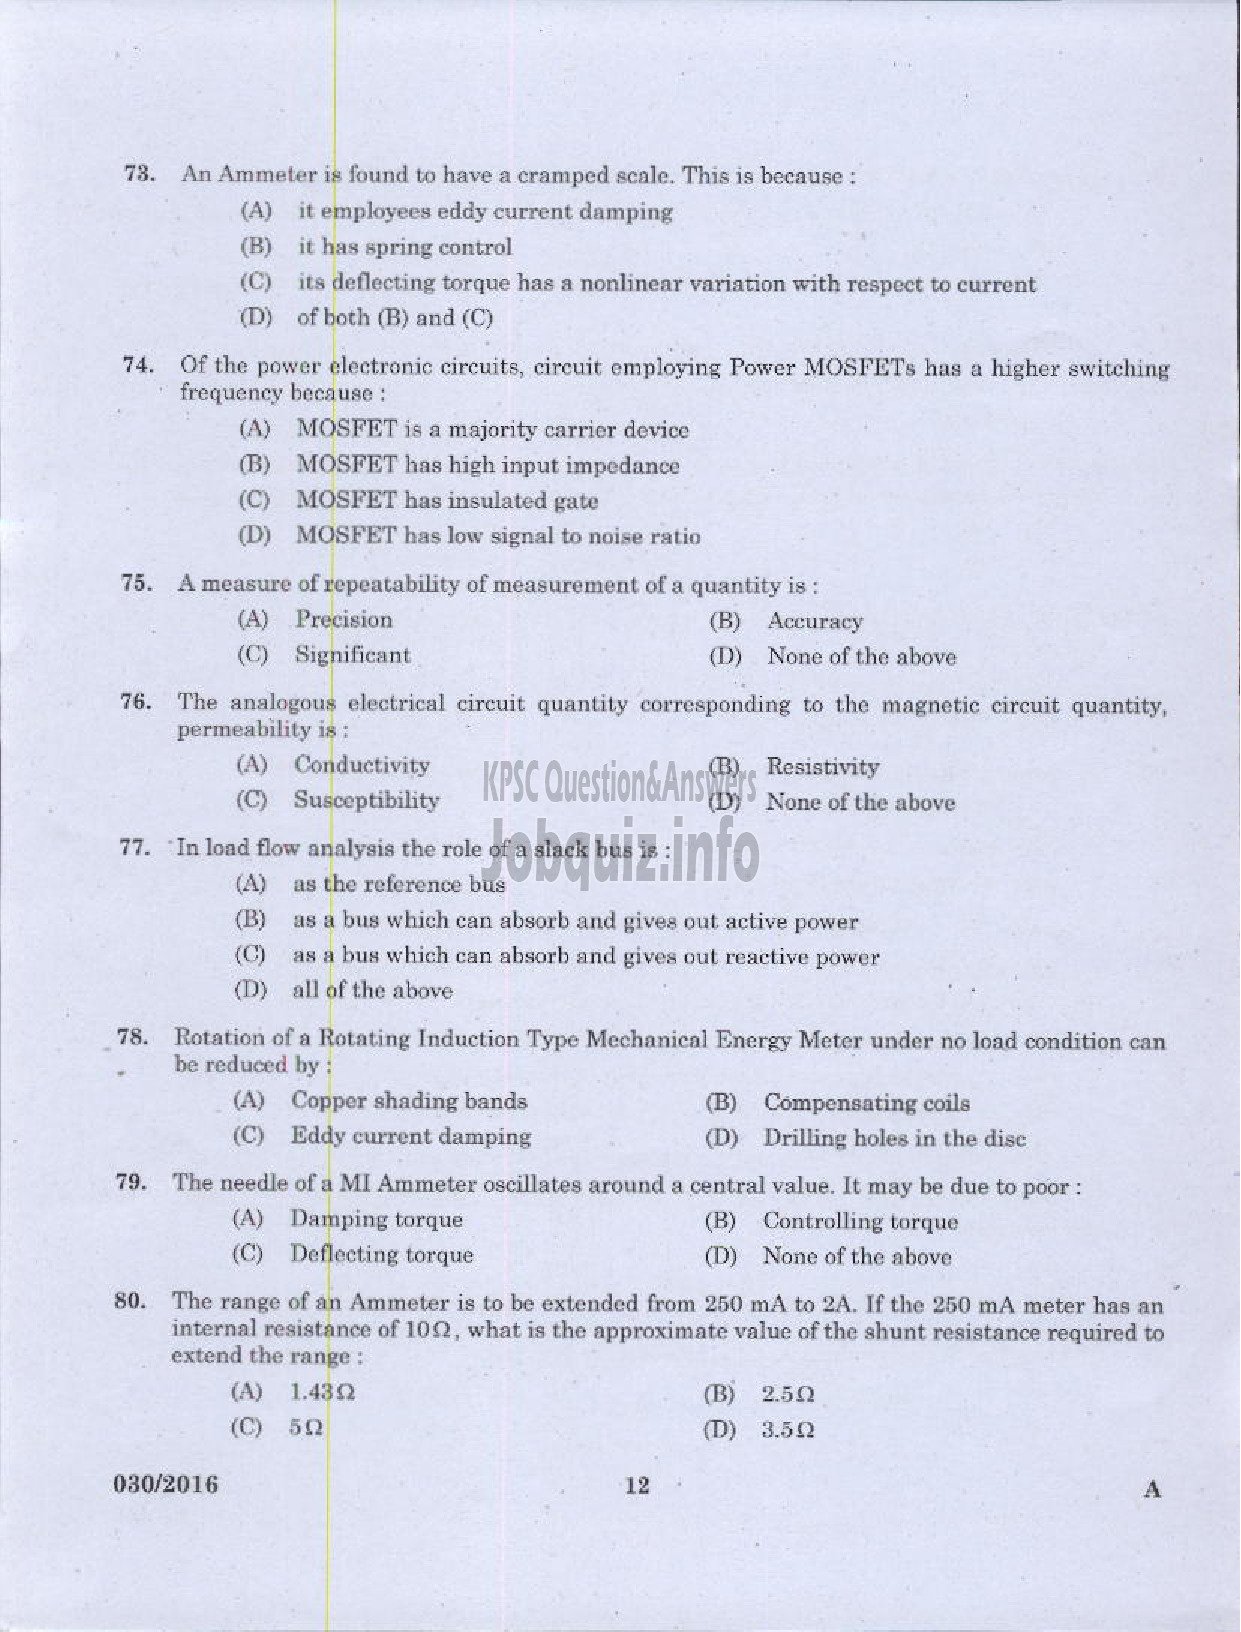 Kerala PSC Question Paper - ASSISTANT ENGINEER ELECTRICAL HARBOUR ENGINEERING-10